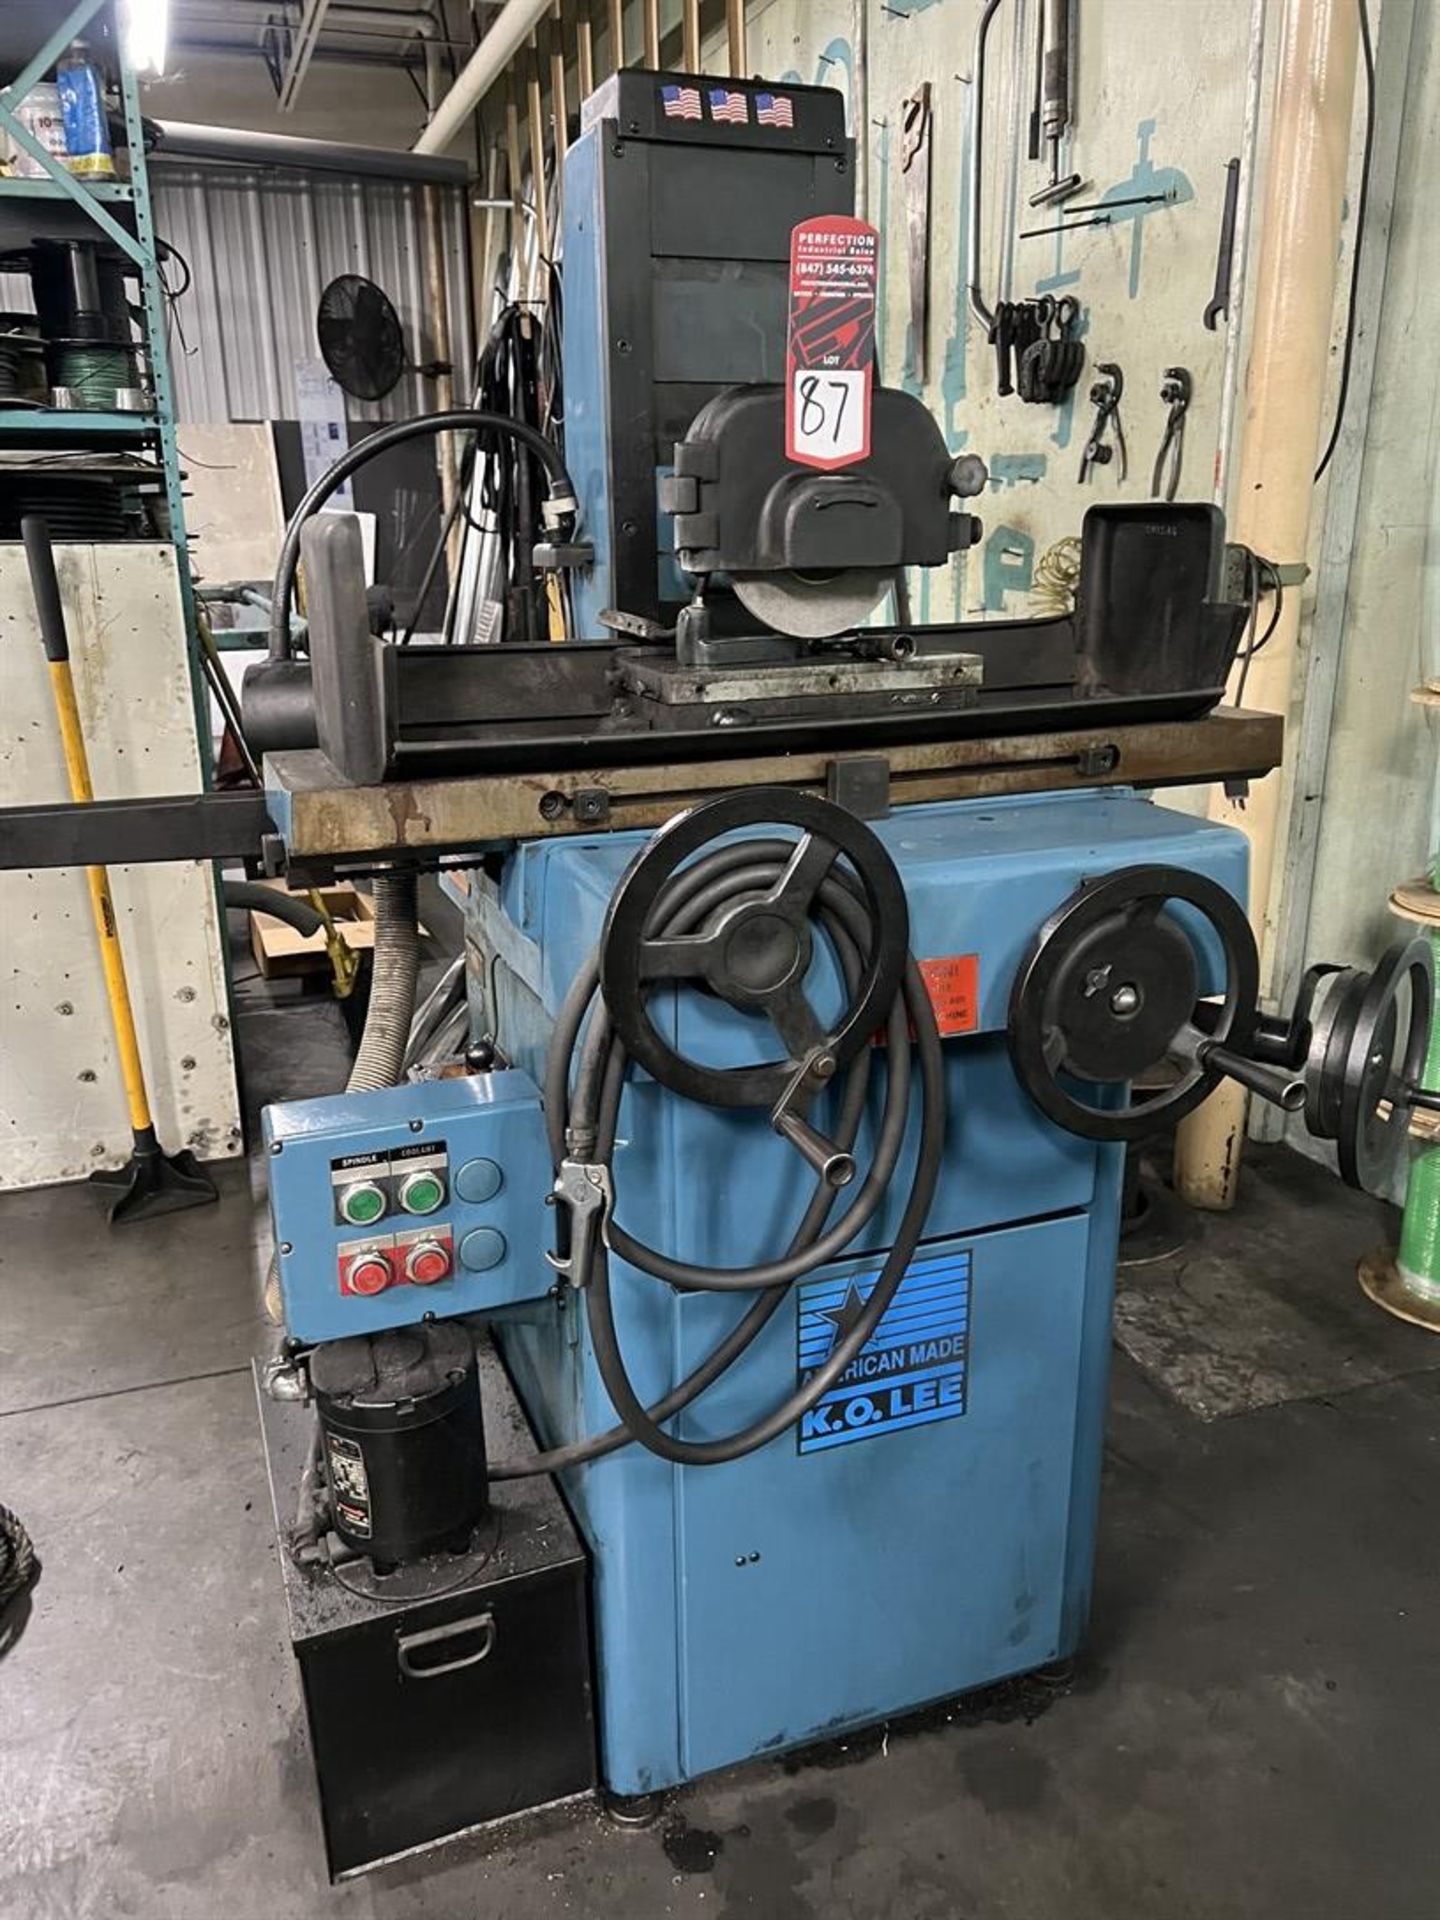 KO LEE SE612 Surface Grinder, s/n 27704, 6" x 12" Magnetic Chuck, Hydraulic System